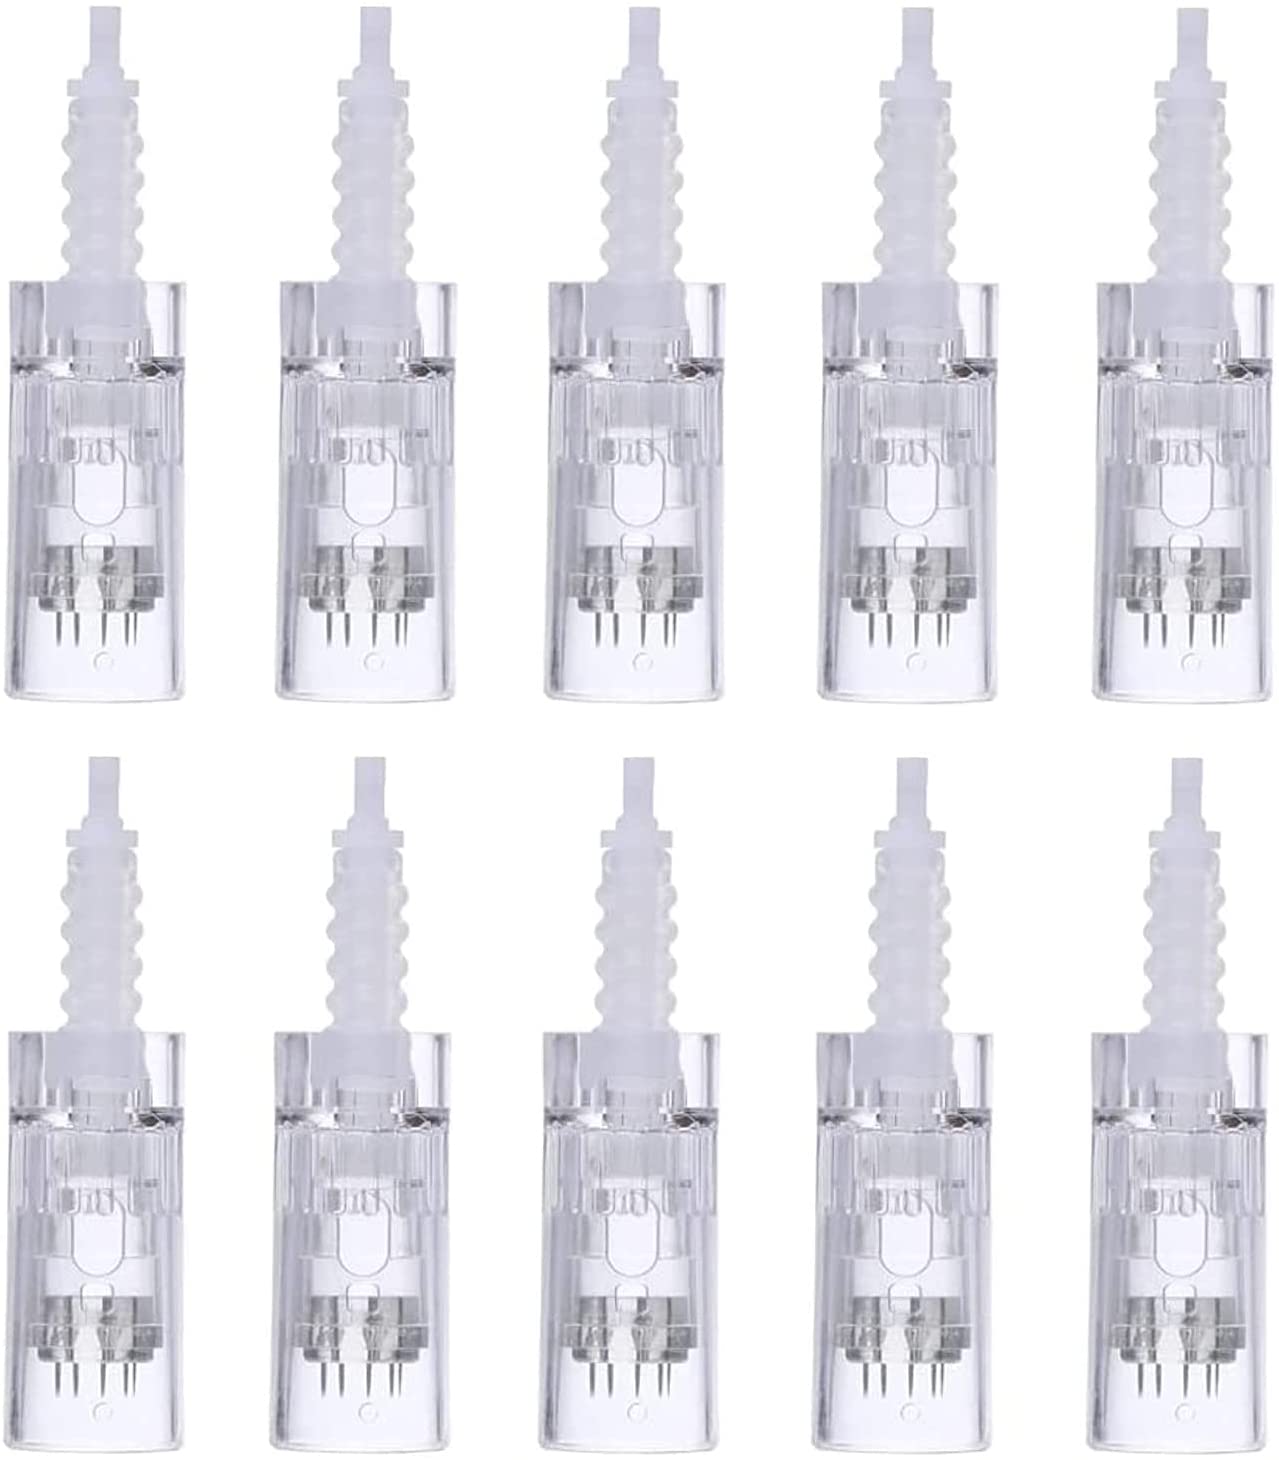 P-Beauty Cosmetic Accessories 12-Pin Needle Cartridges Replacement Needle Cartridges for Car Derma Electric Pen Microneedling Bayonet Closure for Dermapen Devices with Bayonet Port Pack of 10 (12-Pins)